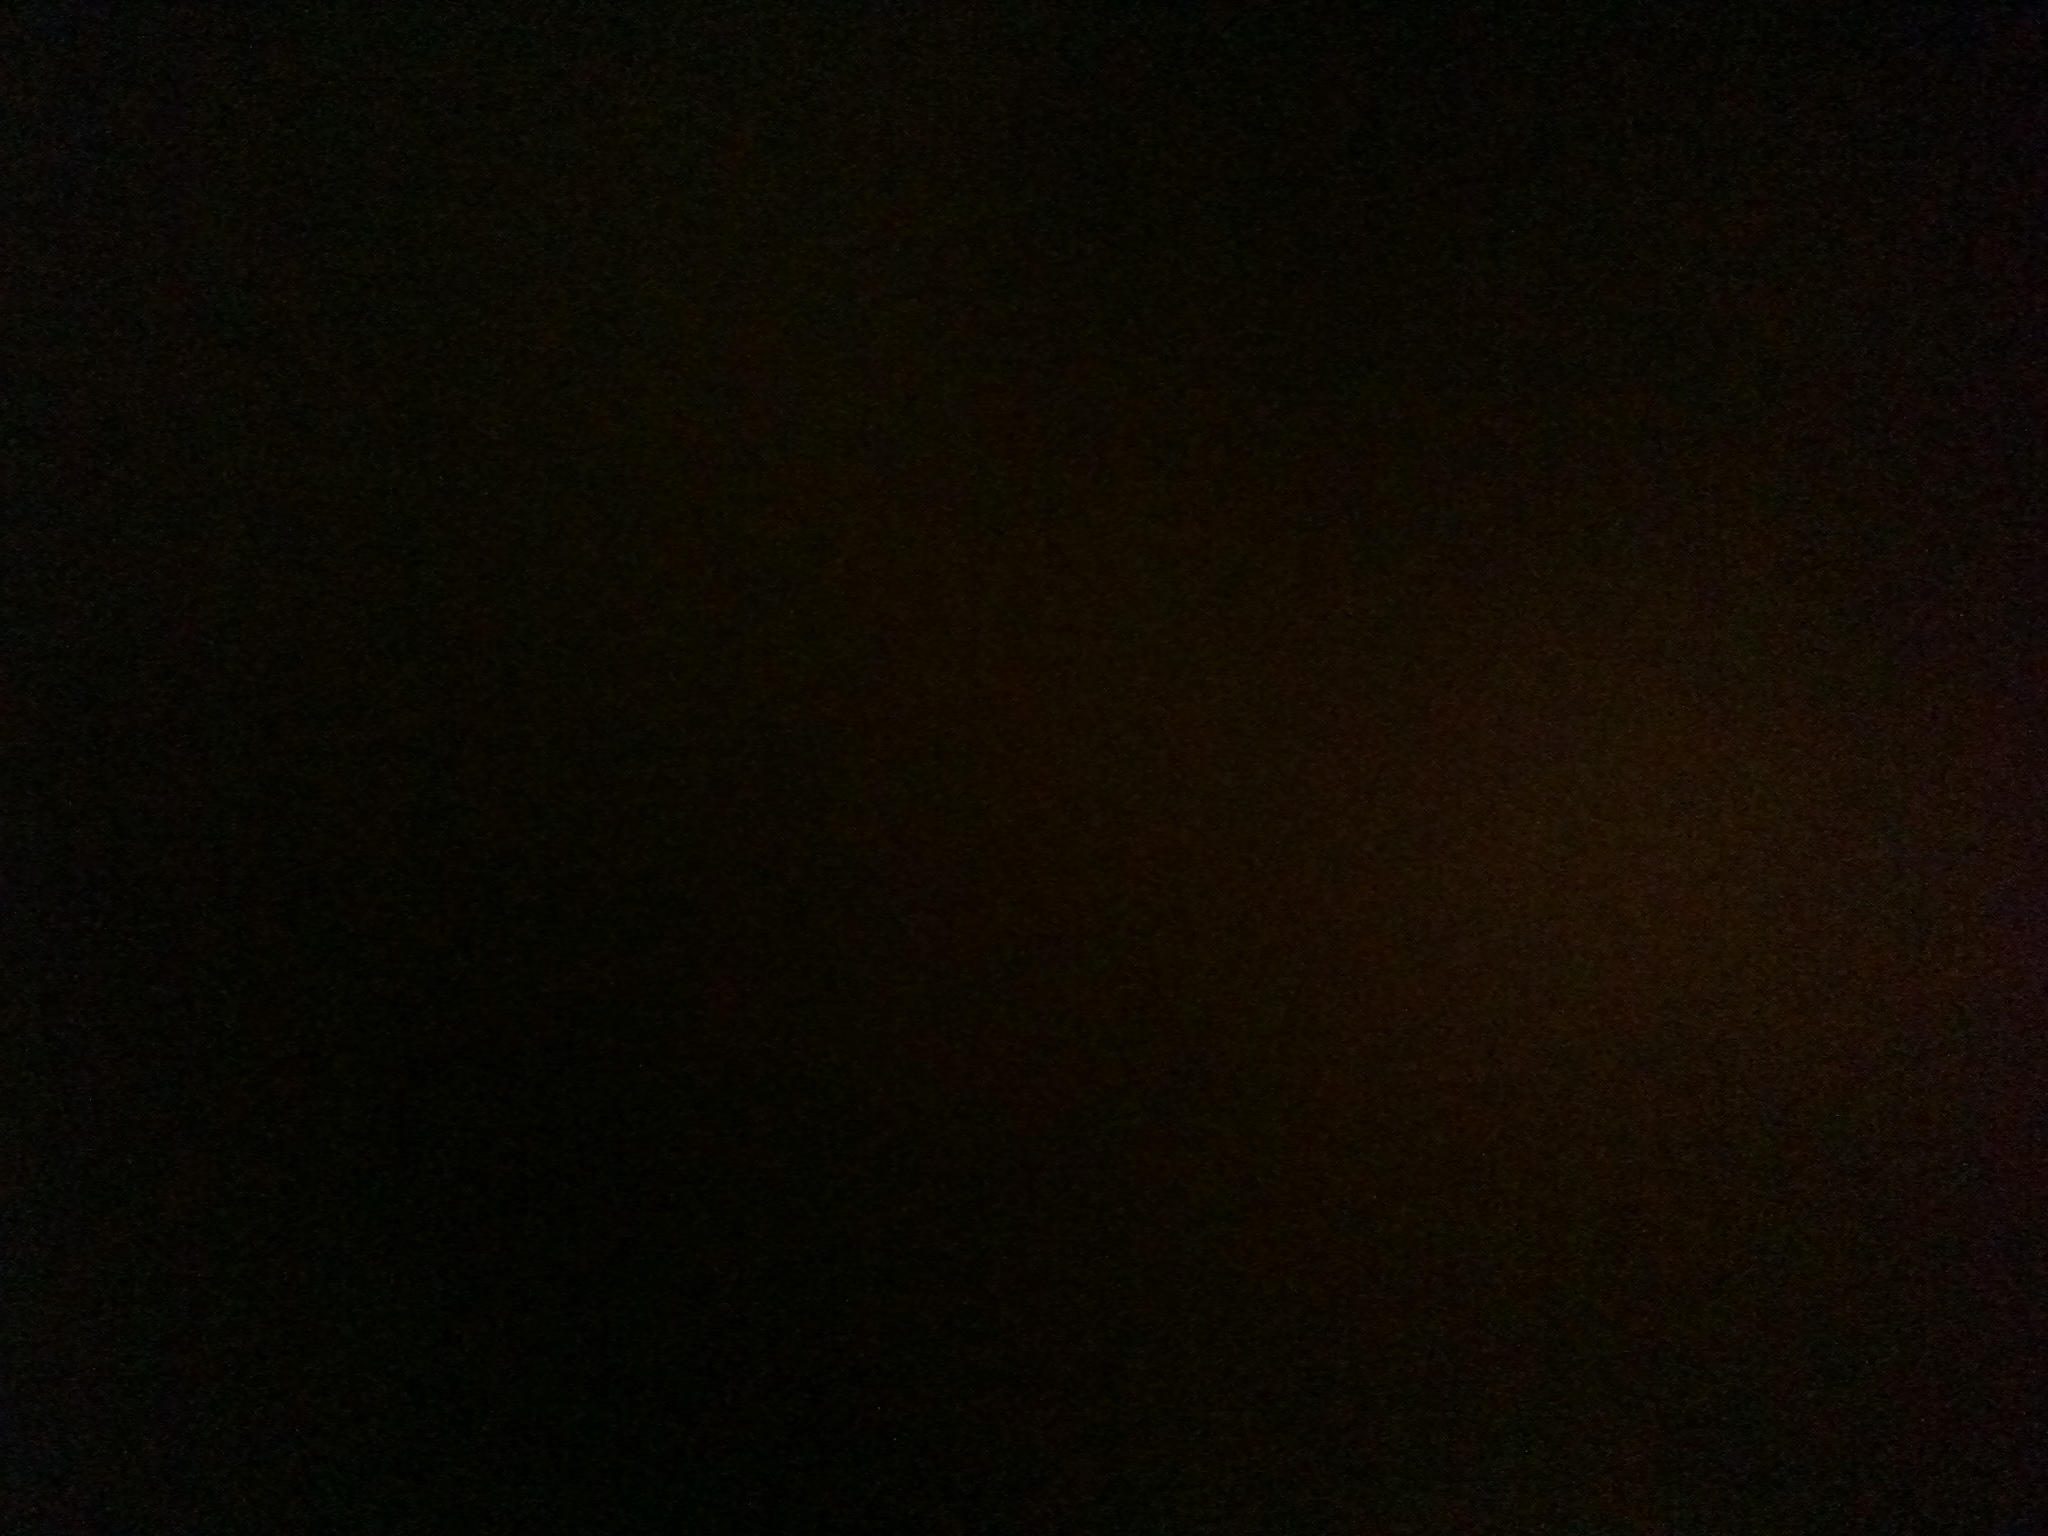 0.about:timeline:2012:iphone:img-0371.jpg